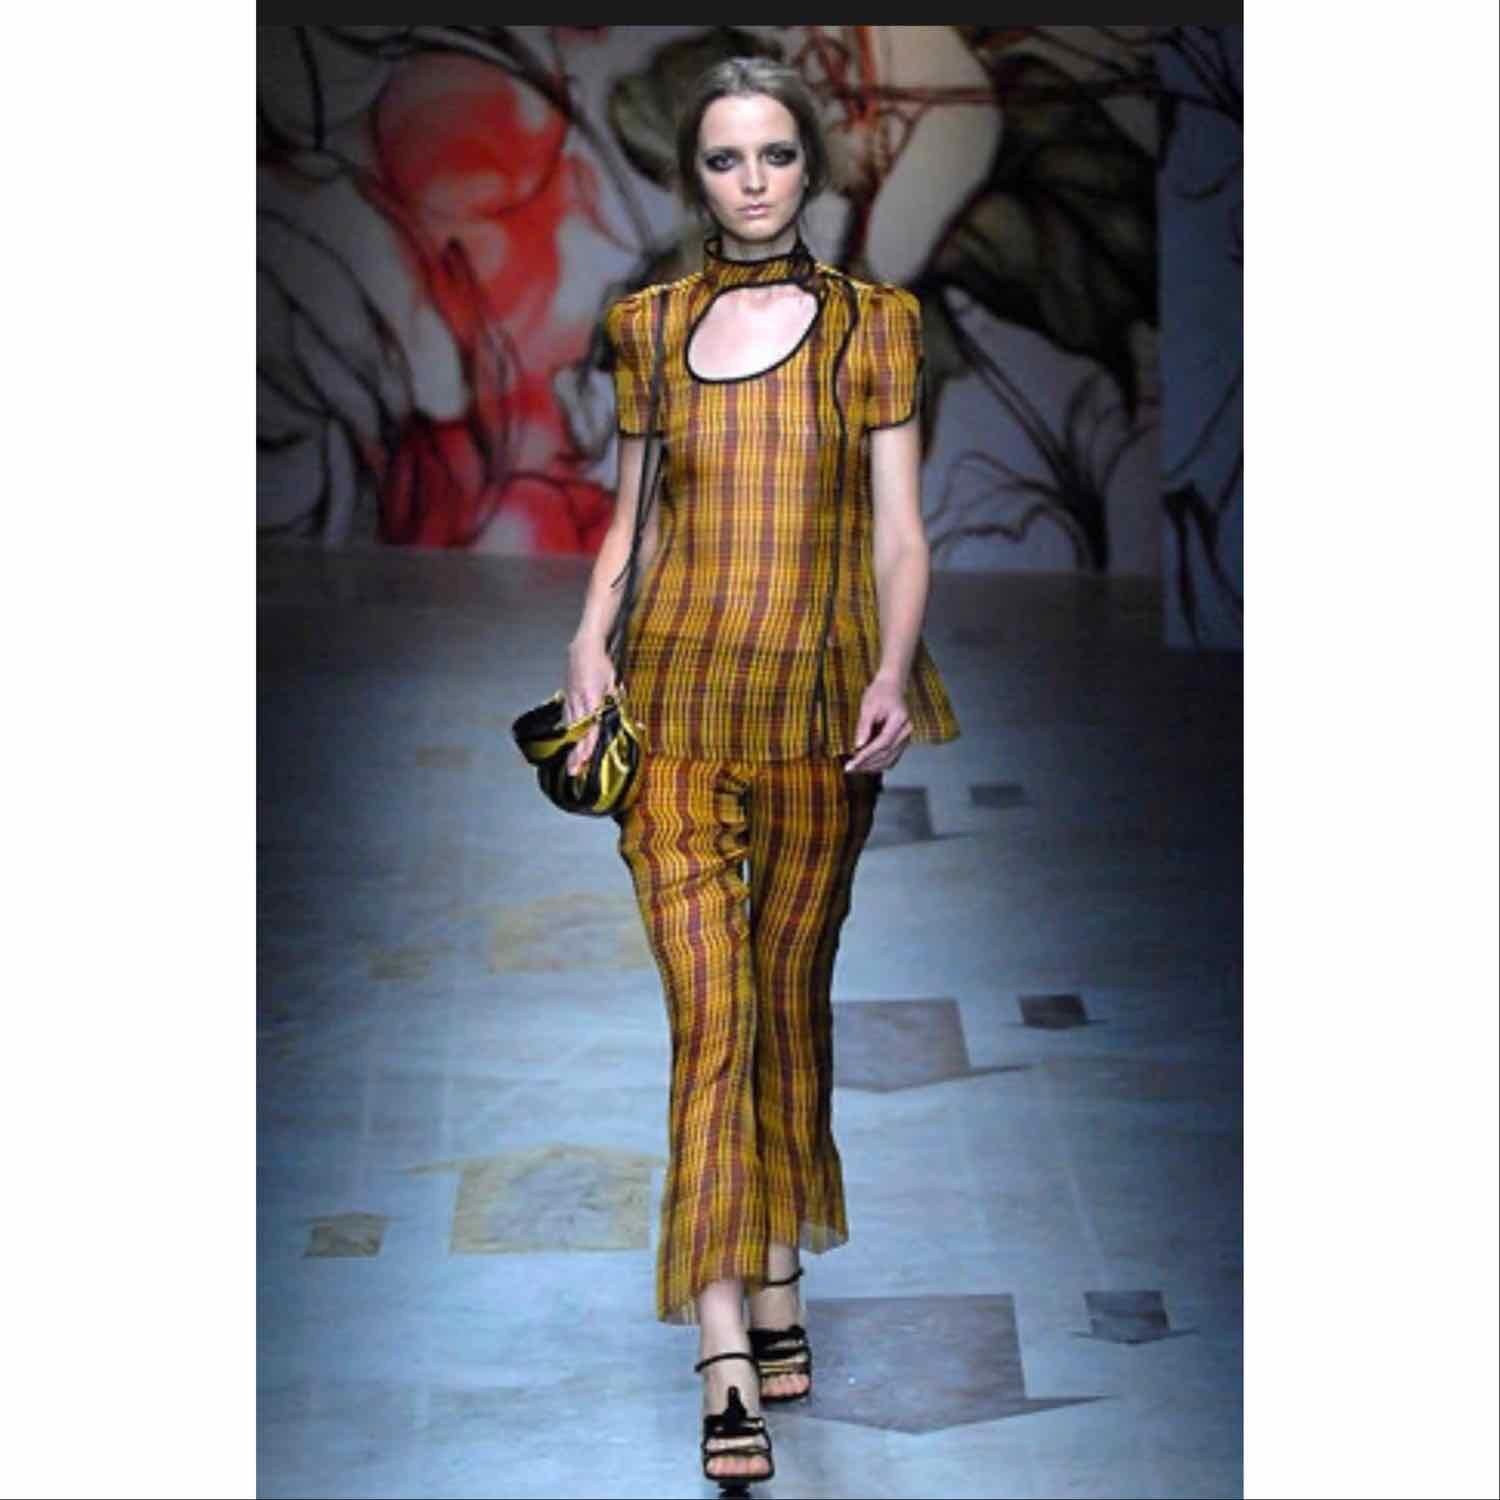 Italian luxury brand Prada has made a mark with their refined styles and classic reinventions. However, the namesake designer Miuccia Prada is no stranger to considering creative twists. Stating that this collection was all about working from a “new